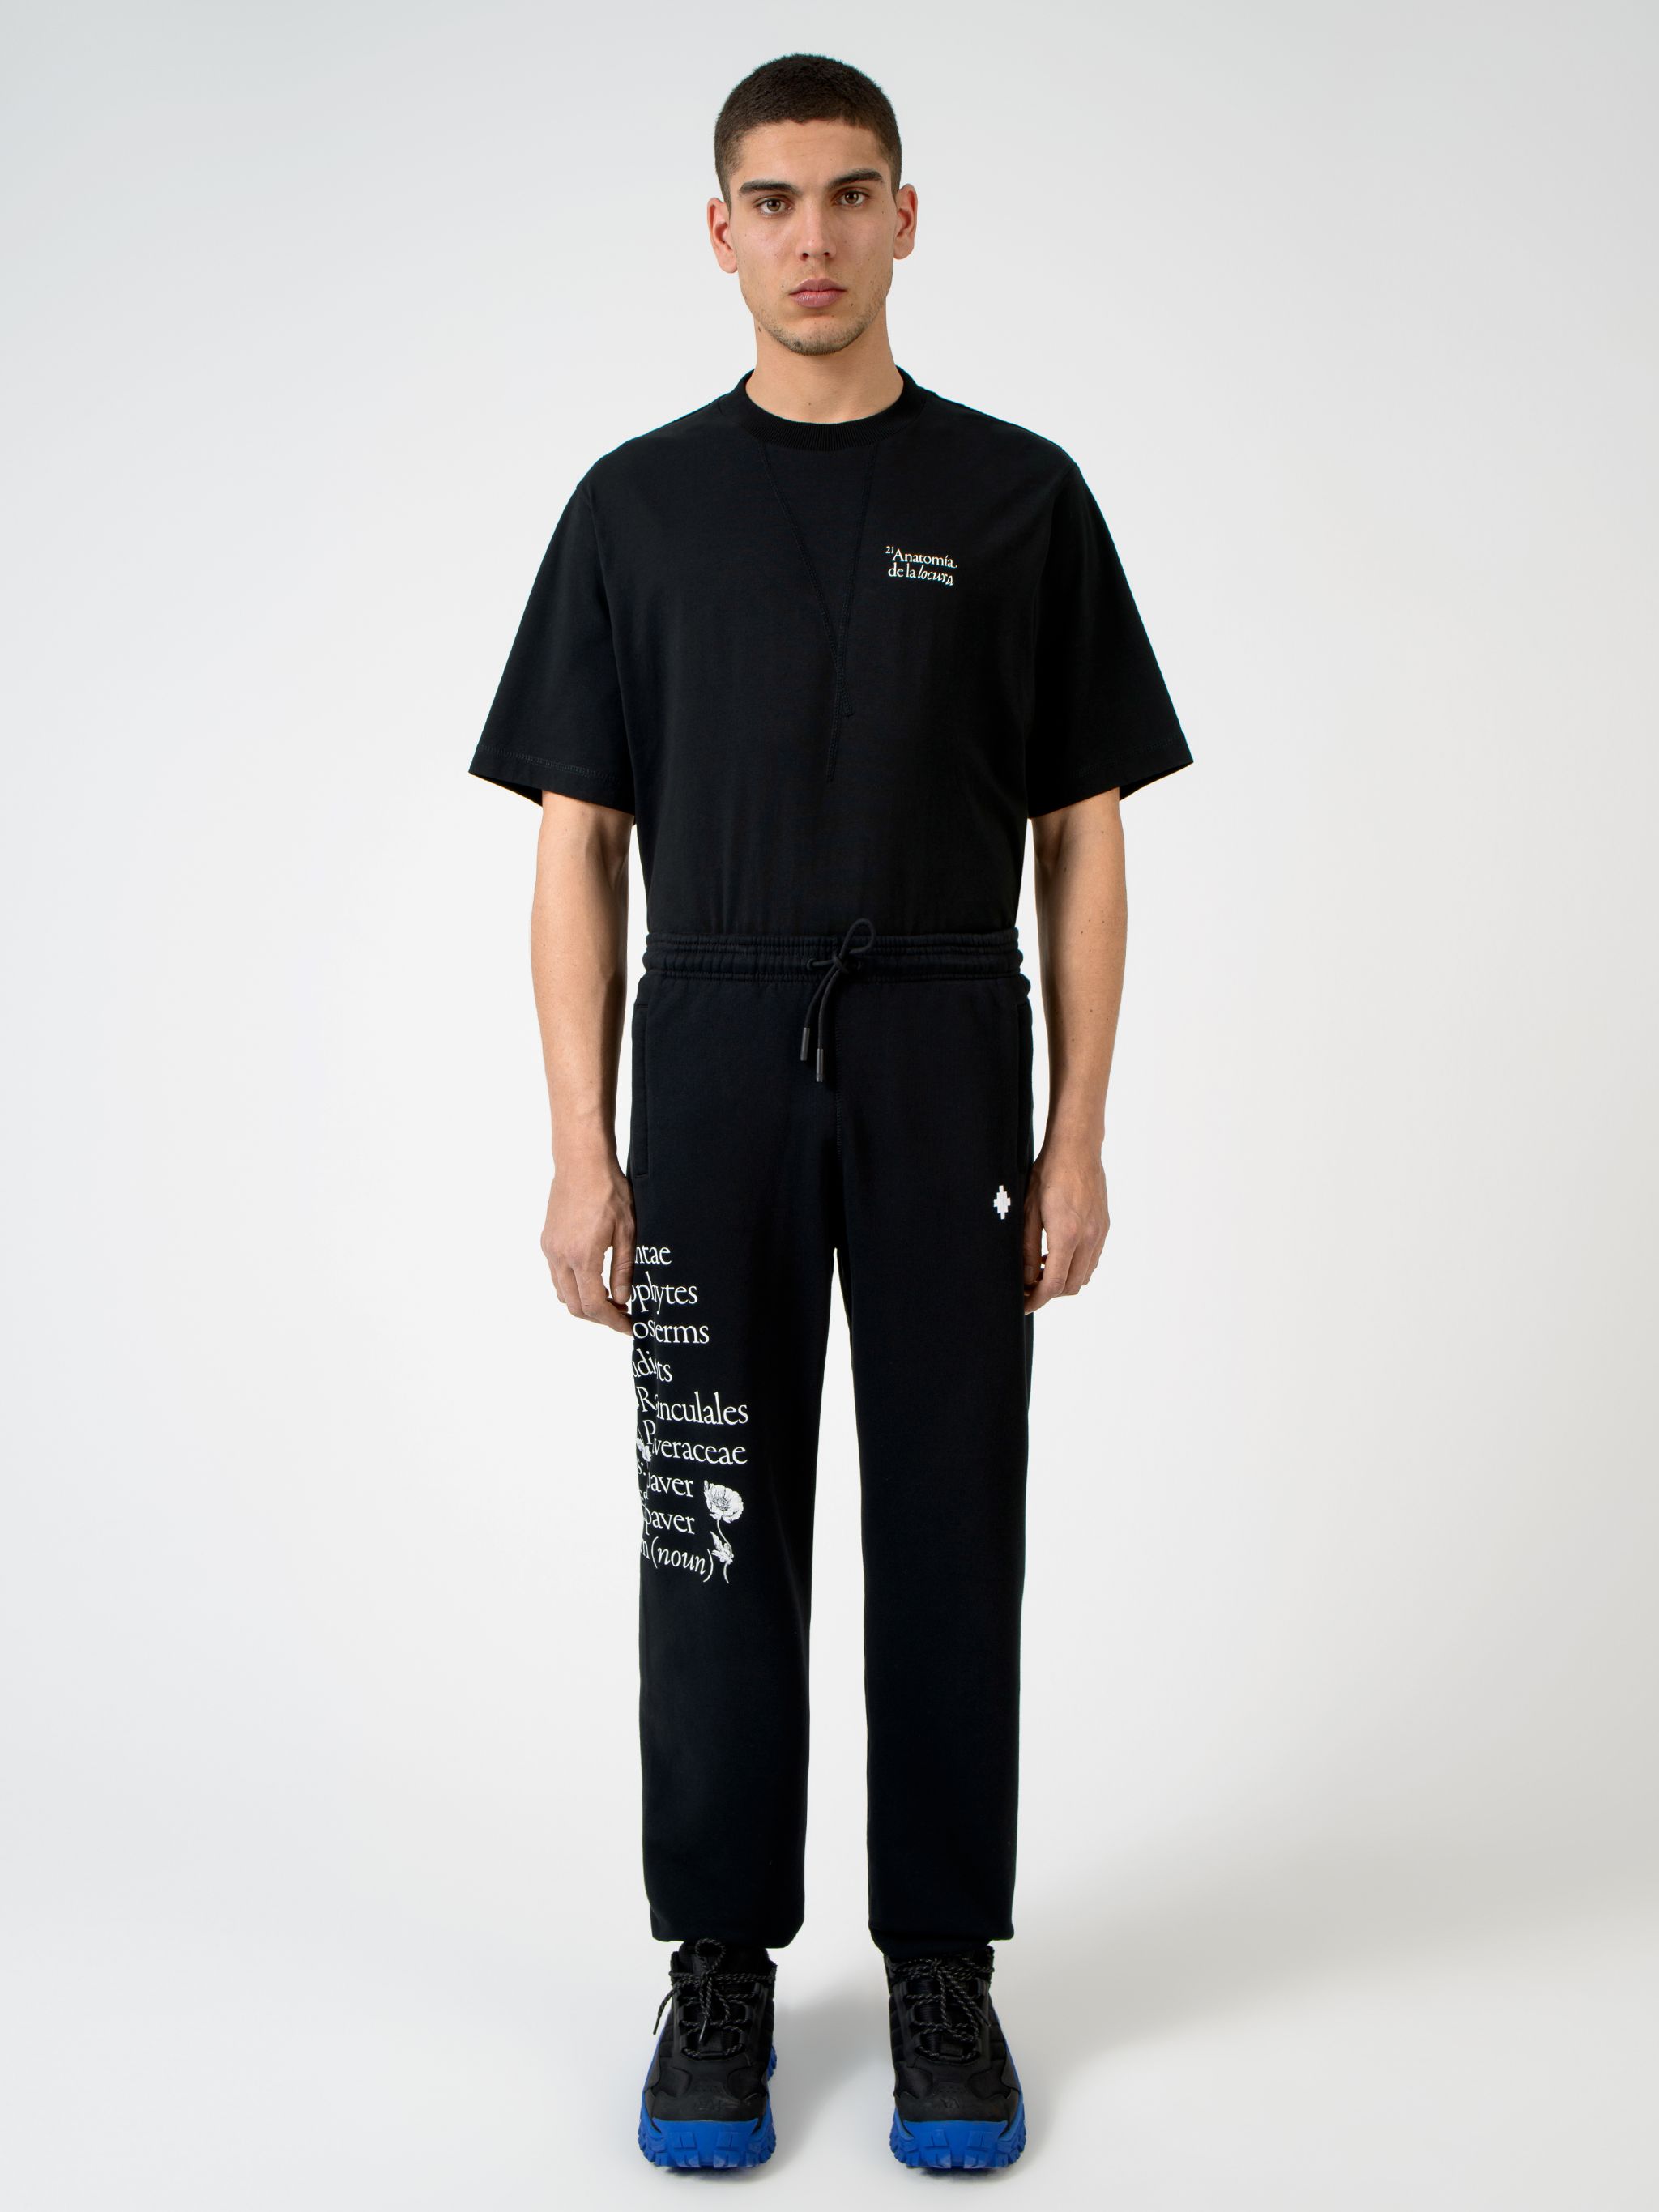 black cotton embroidered logo to the front slogan print elasticated ankles elasticated waistband drawstring fastening tapered design two side slit pockets rear welt pocket